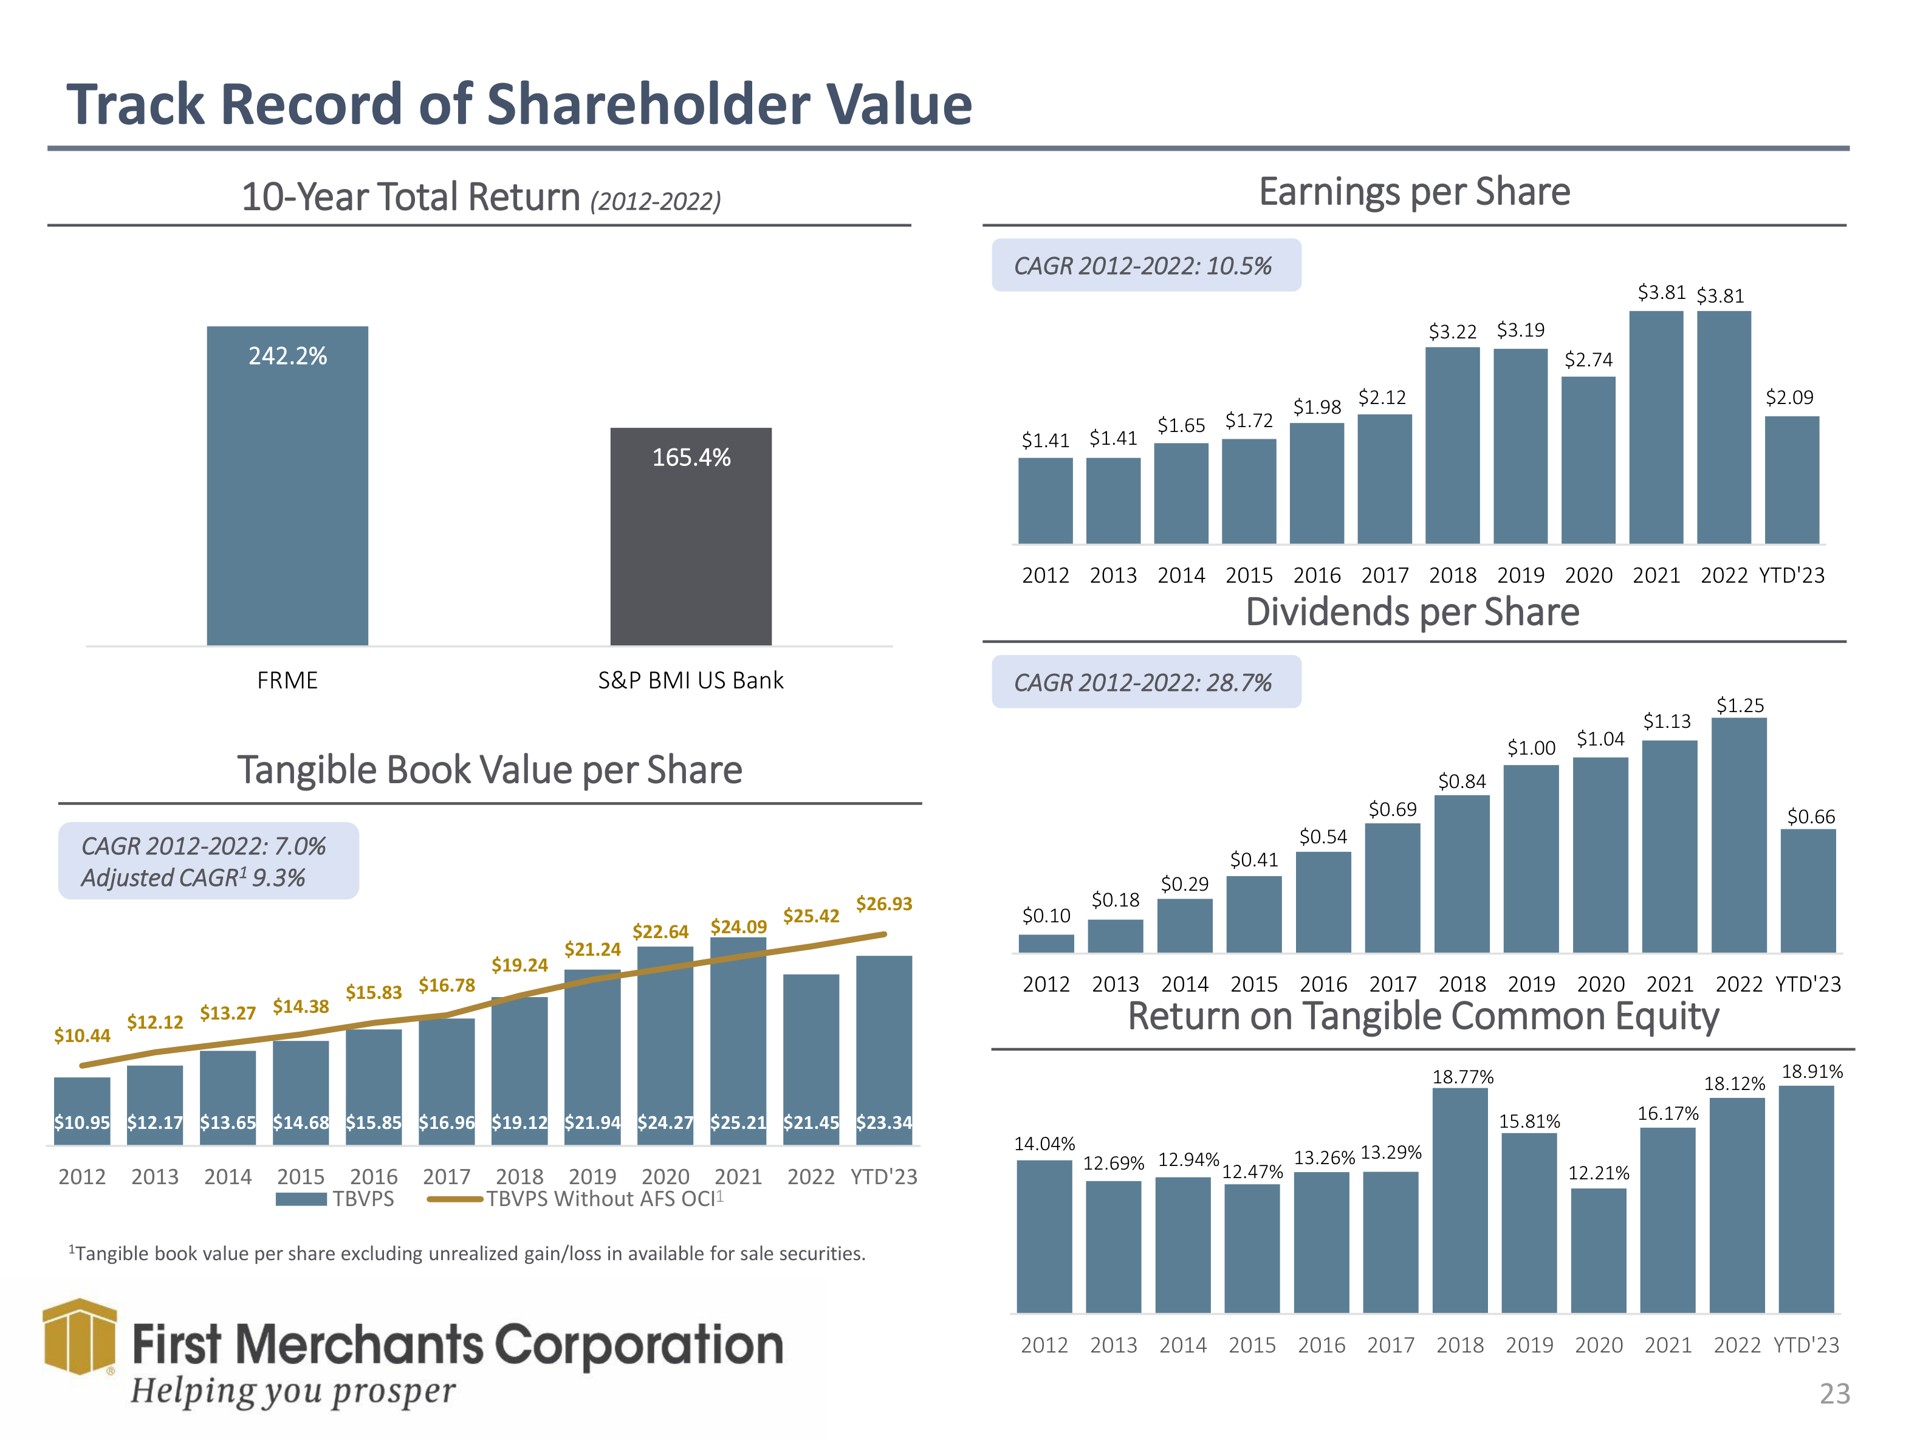 track record of shareholder value year total return earnings per share dividends per share tangible book per share a a common equity equity return on helping you prosper | First Merchants